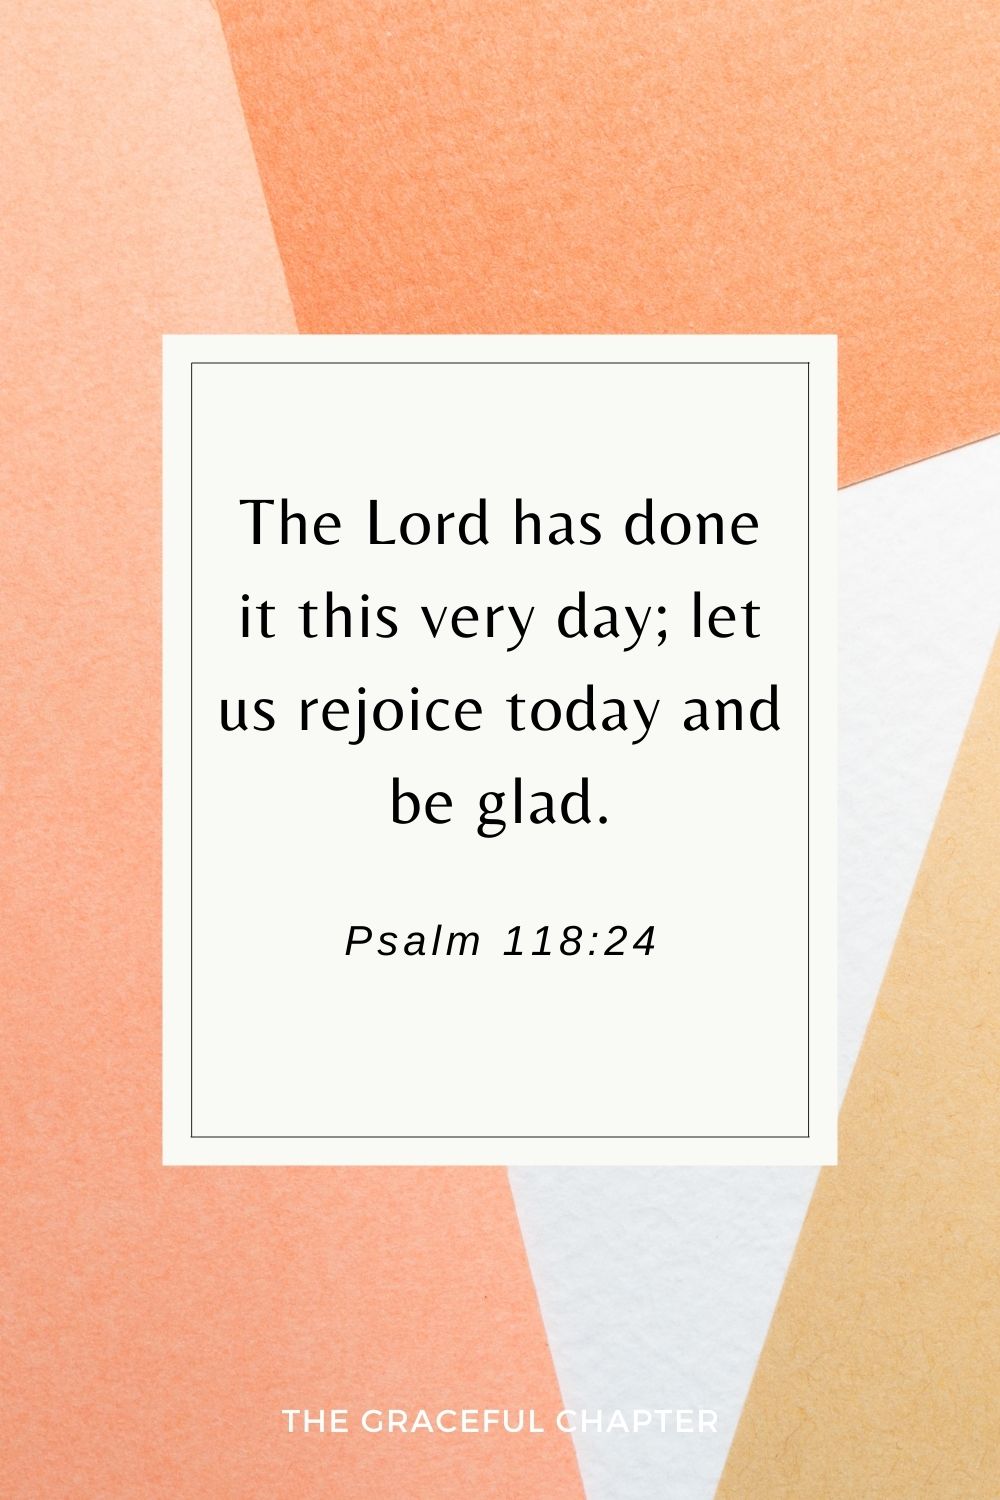 The Lord has done it this very day; let us rejoice today and be glad. Psalm 118:24